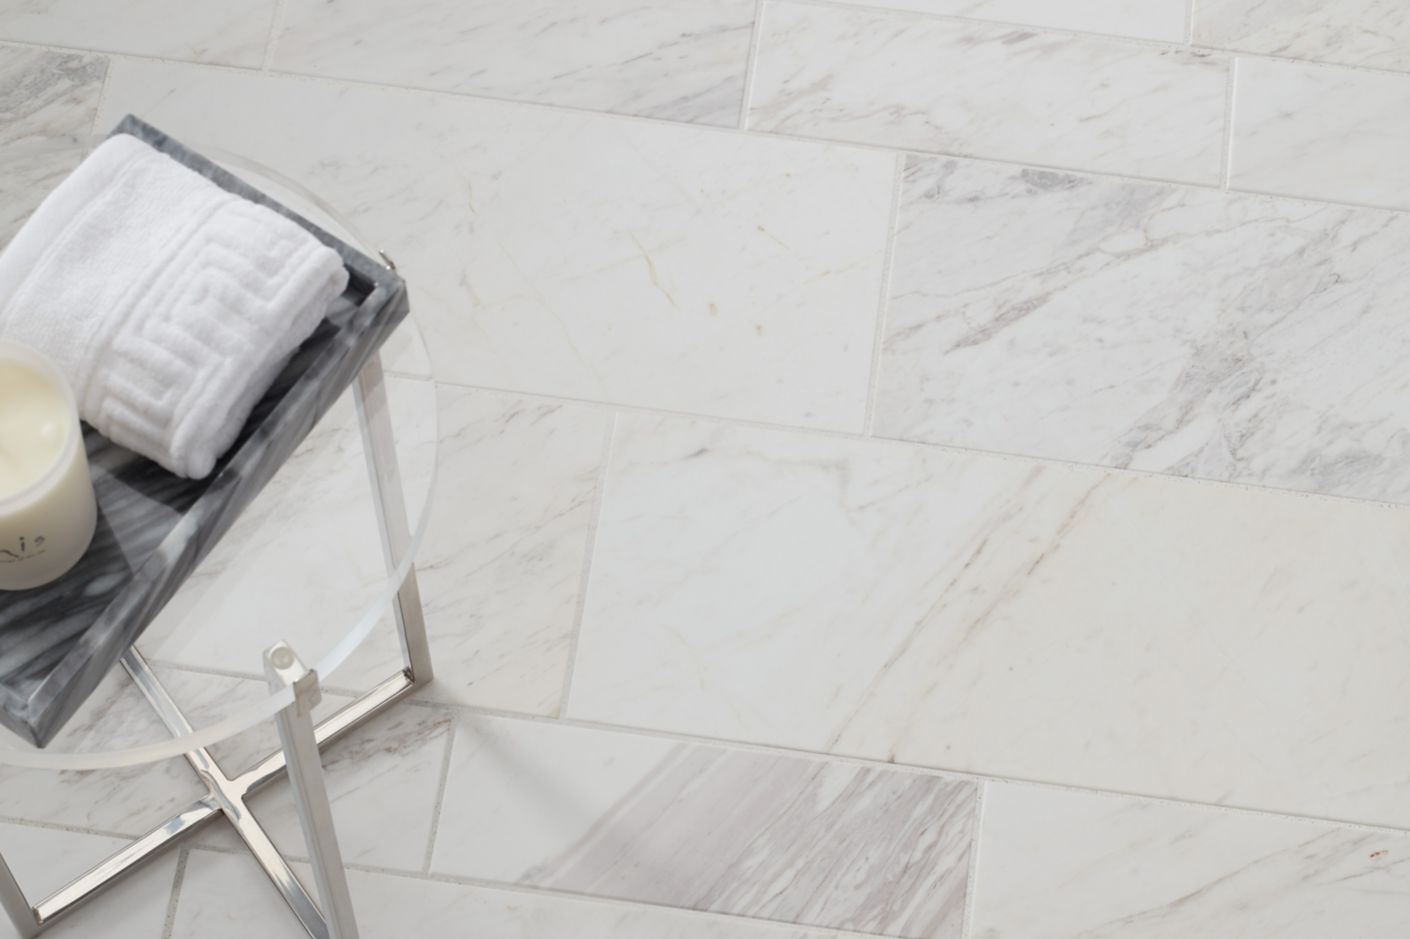 Aerial shot of a white marble subway tile floor with a small table.